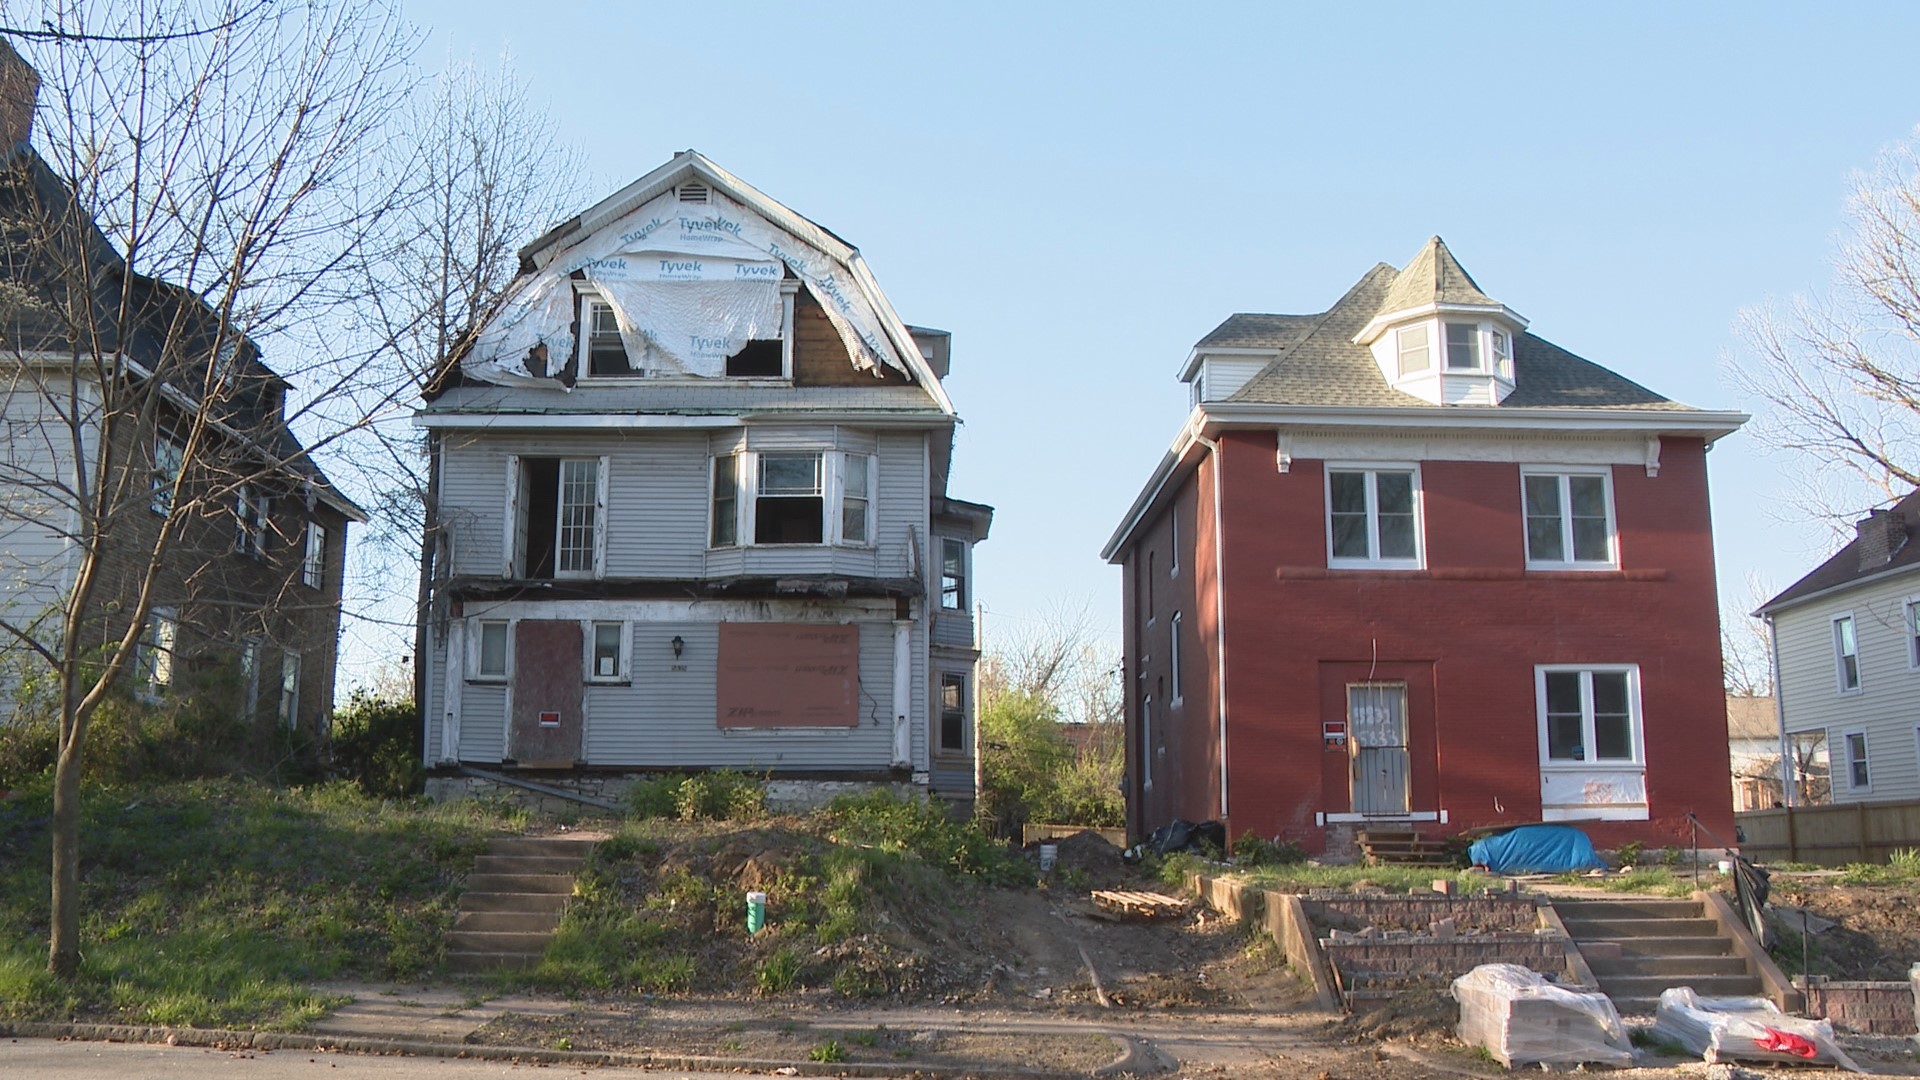 There are nearly 25,000 vacant properties, according to data from the city. House Bill 2218 would help eliminate them.